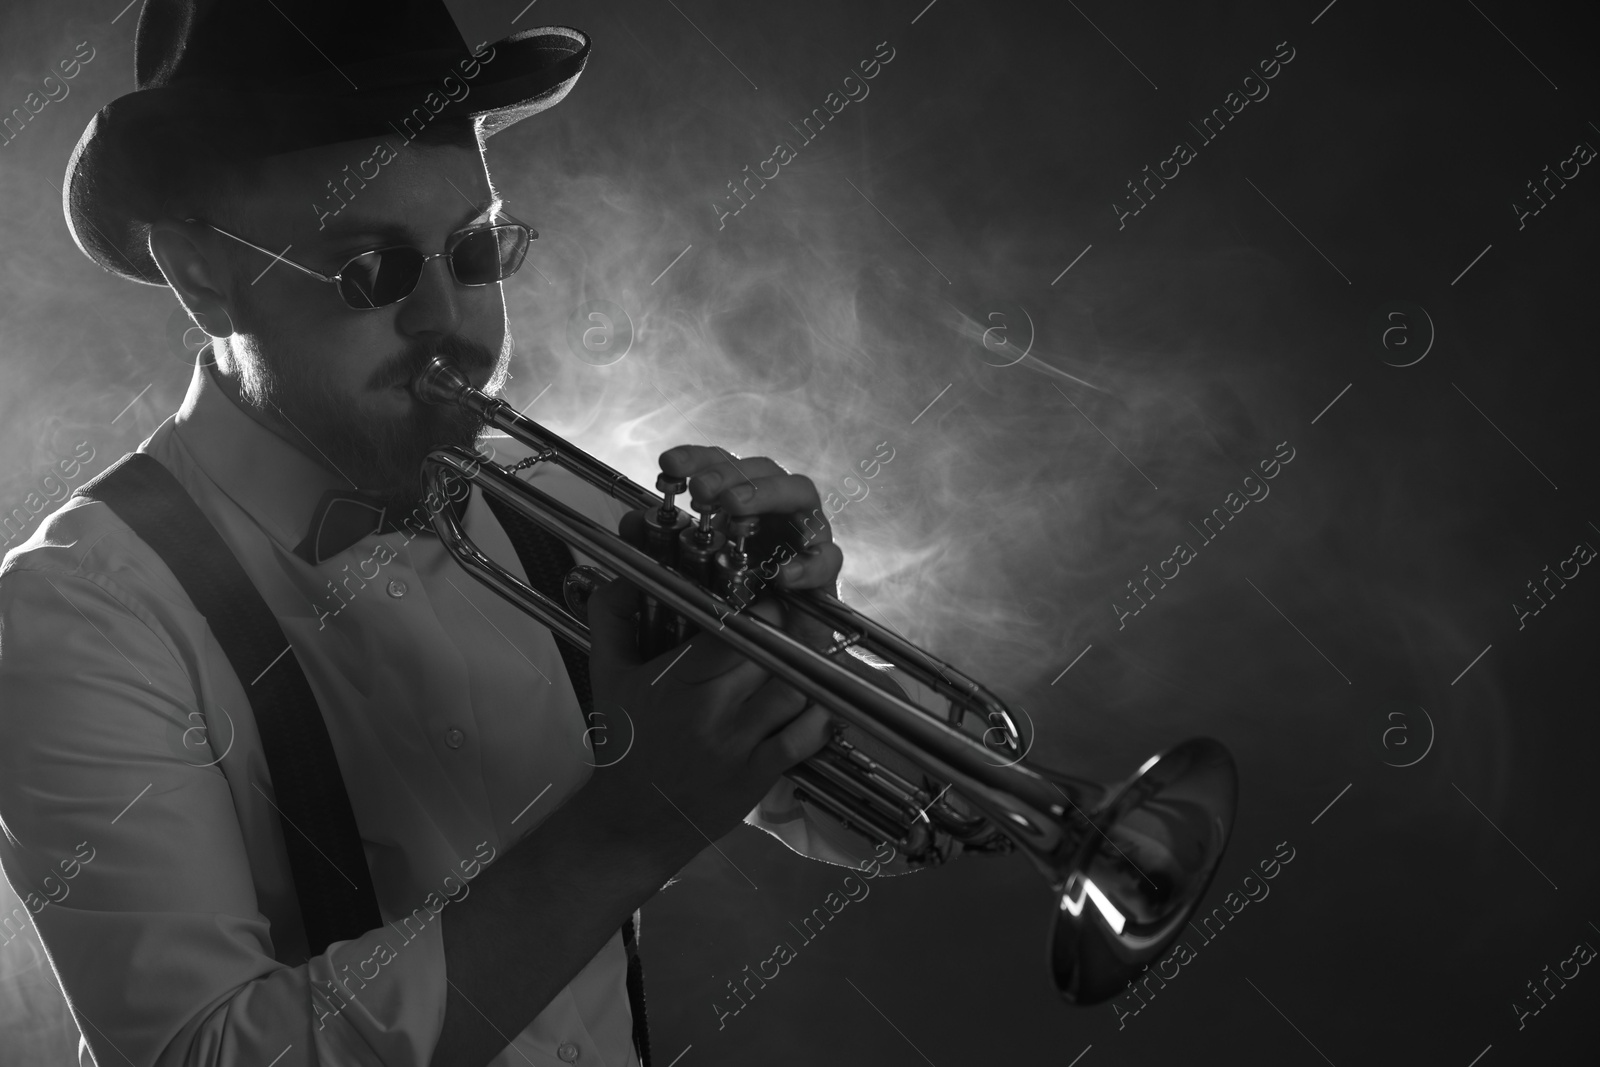 Photo of Professional musician playing trumpet on dark background with smoke, space for text. Black and white effect